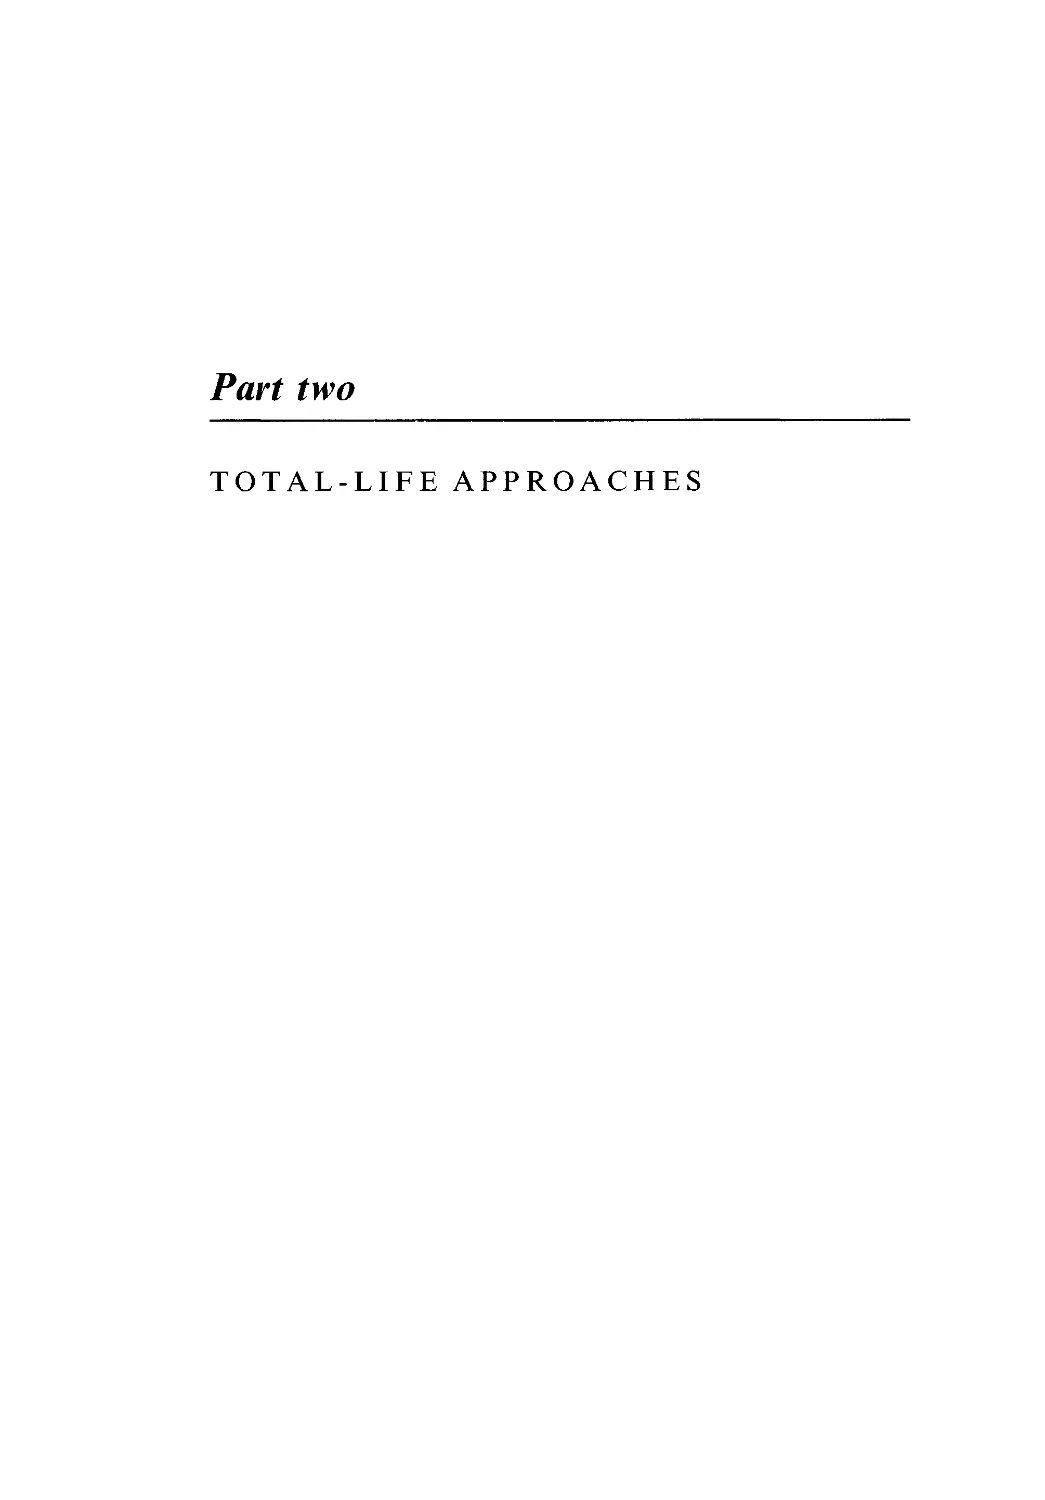 PART TWO - TOTAL-LIFE APPROACHES